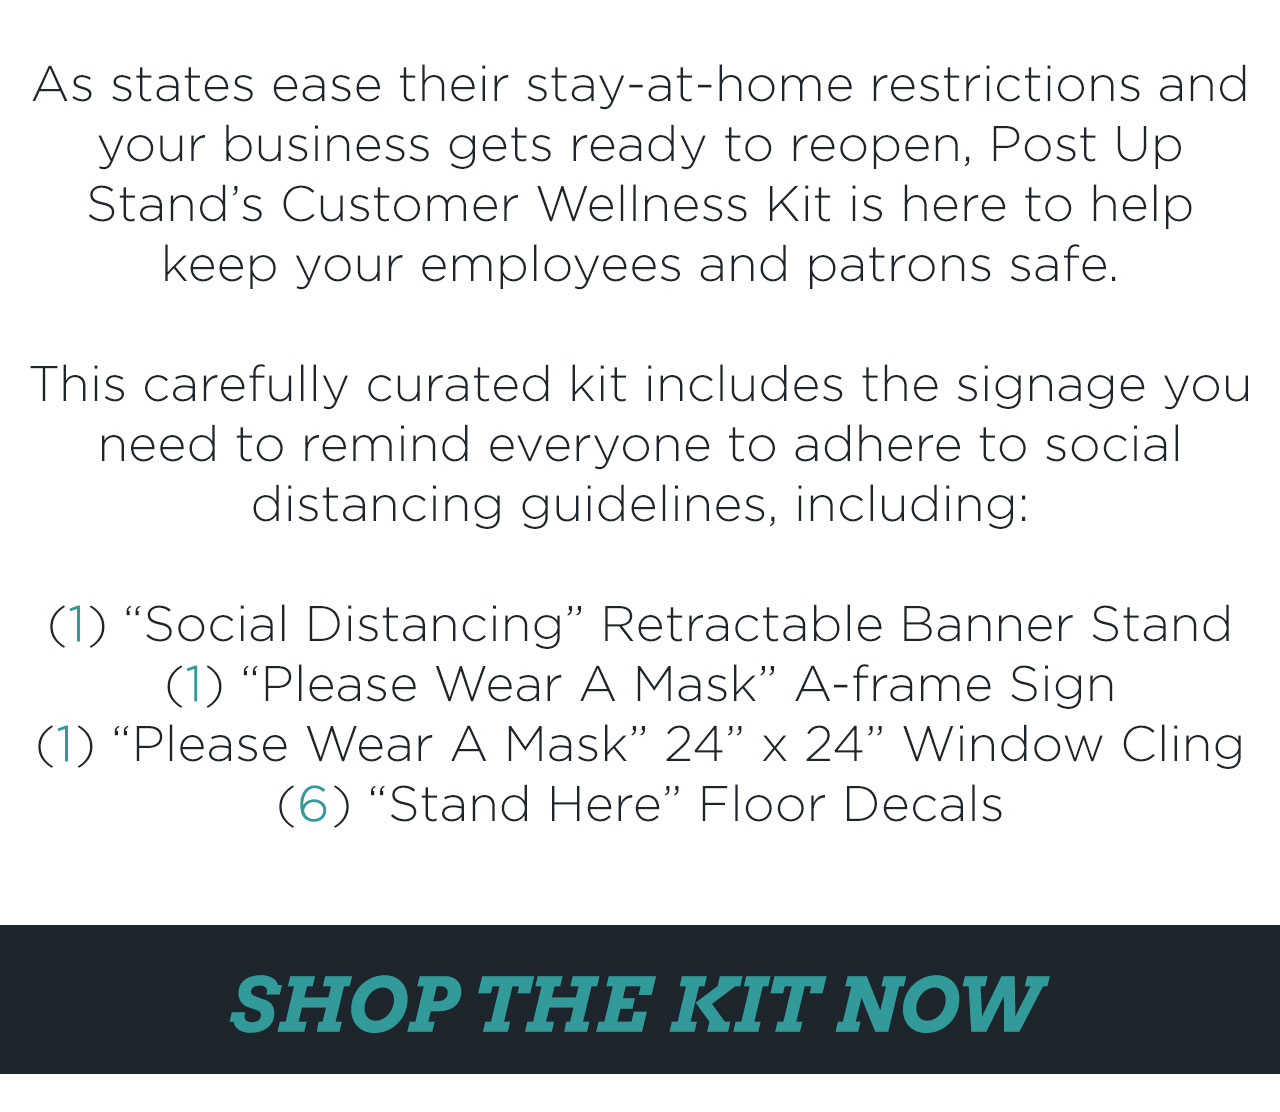 As states ease their stay-at-home restrictions and your business gets ready to reopen, Post Up Stand''s Customer Wellness Kit is here to help keep your employees and patrons safe. This carefully curated kit includes the signage your need to remind everyone to adhere to social distancing guidelines